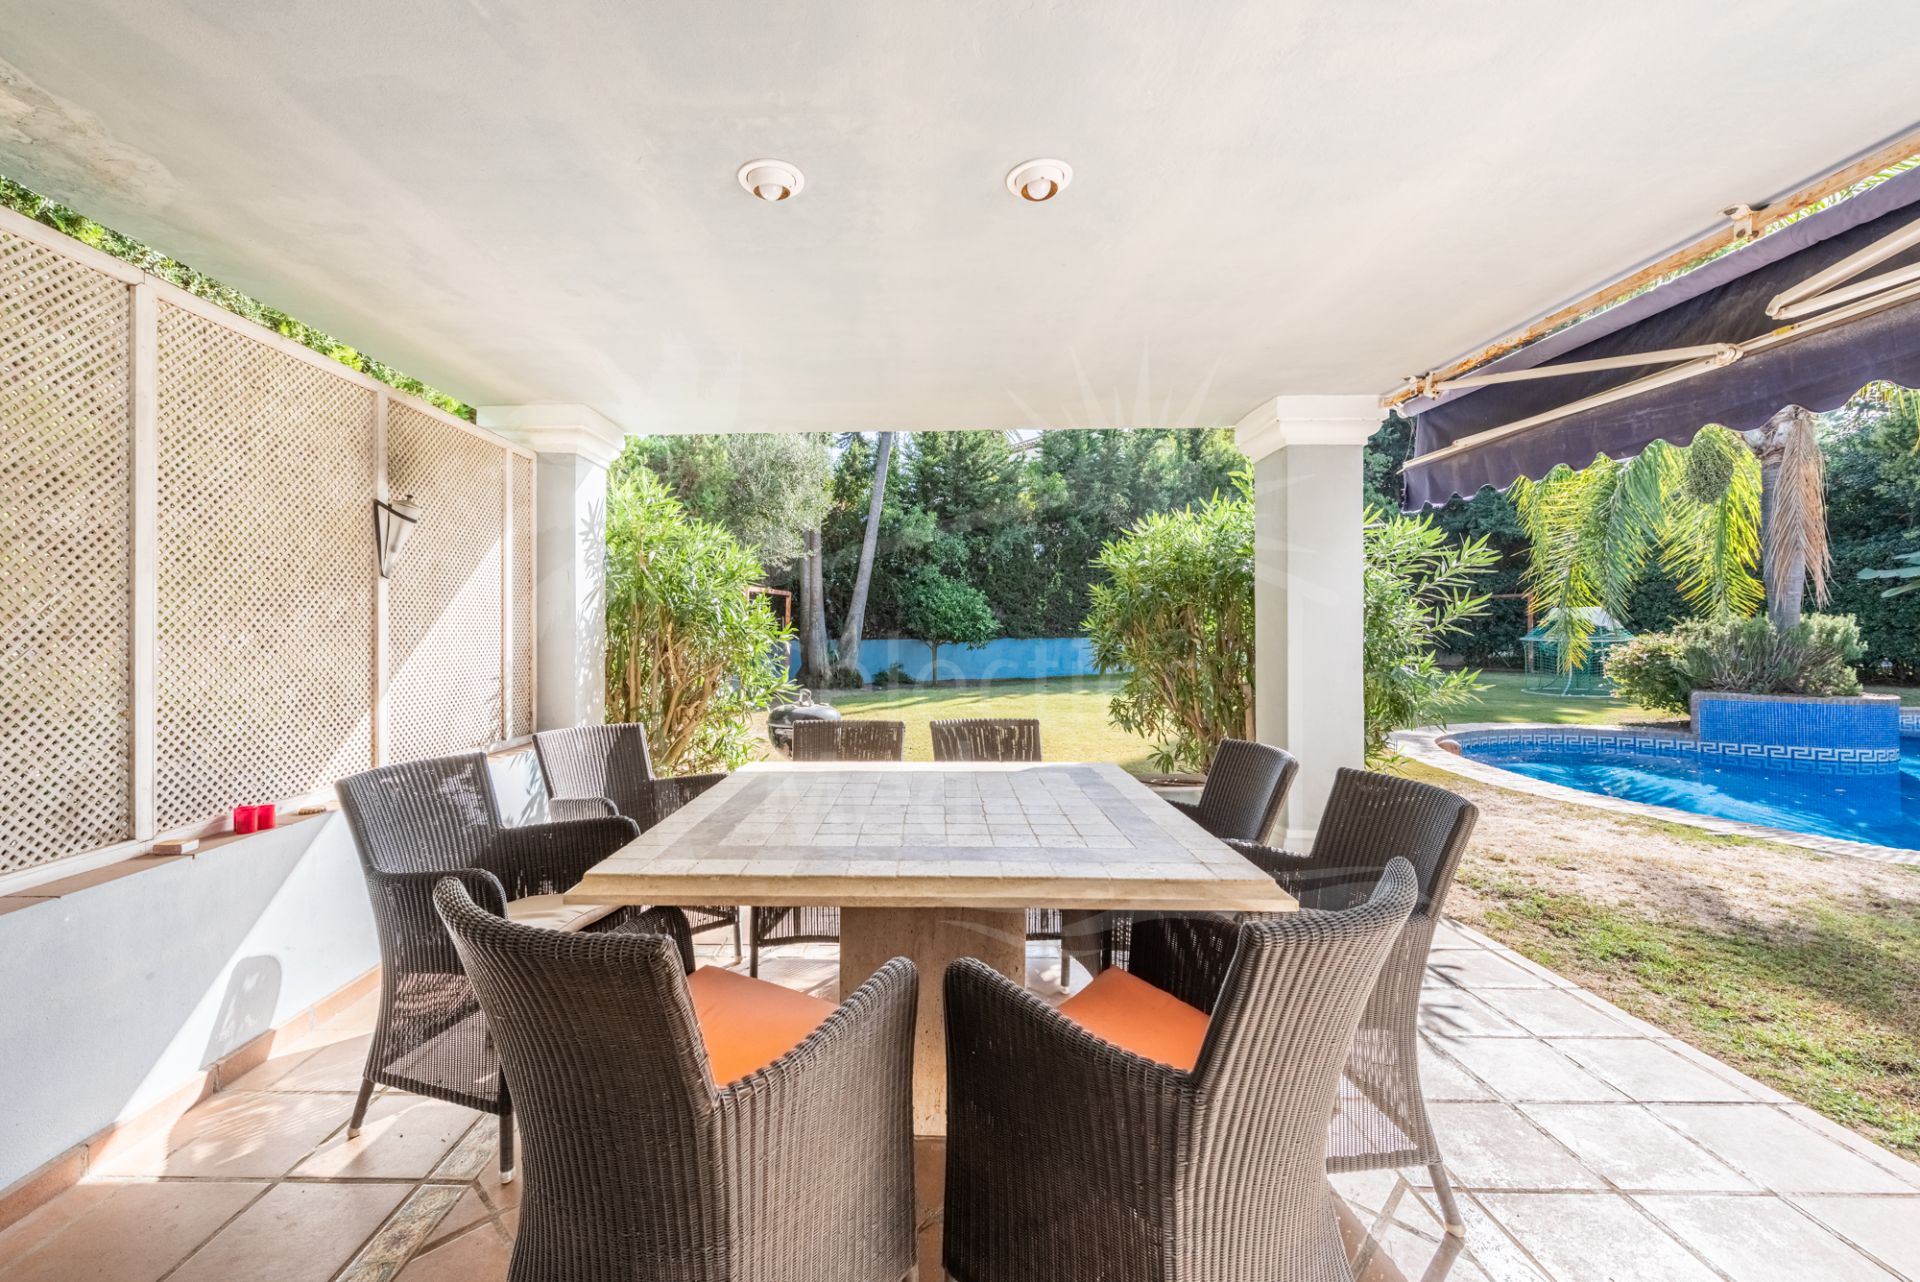 Spacious and Private 4-Bedroom Family Home in Sotogrande Costa.